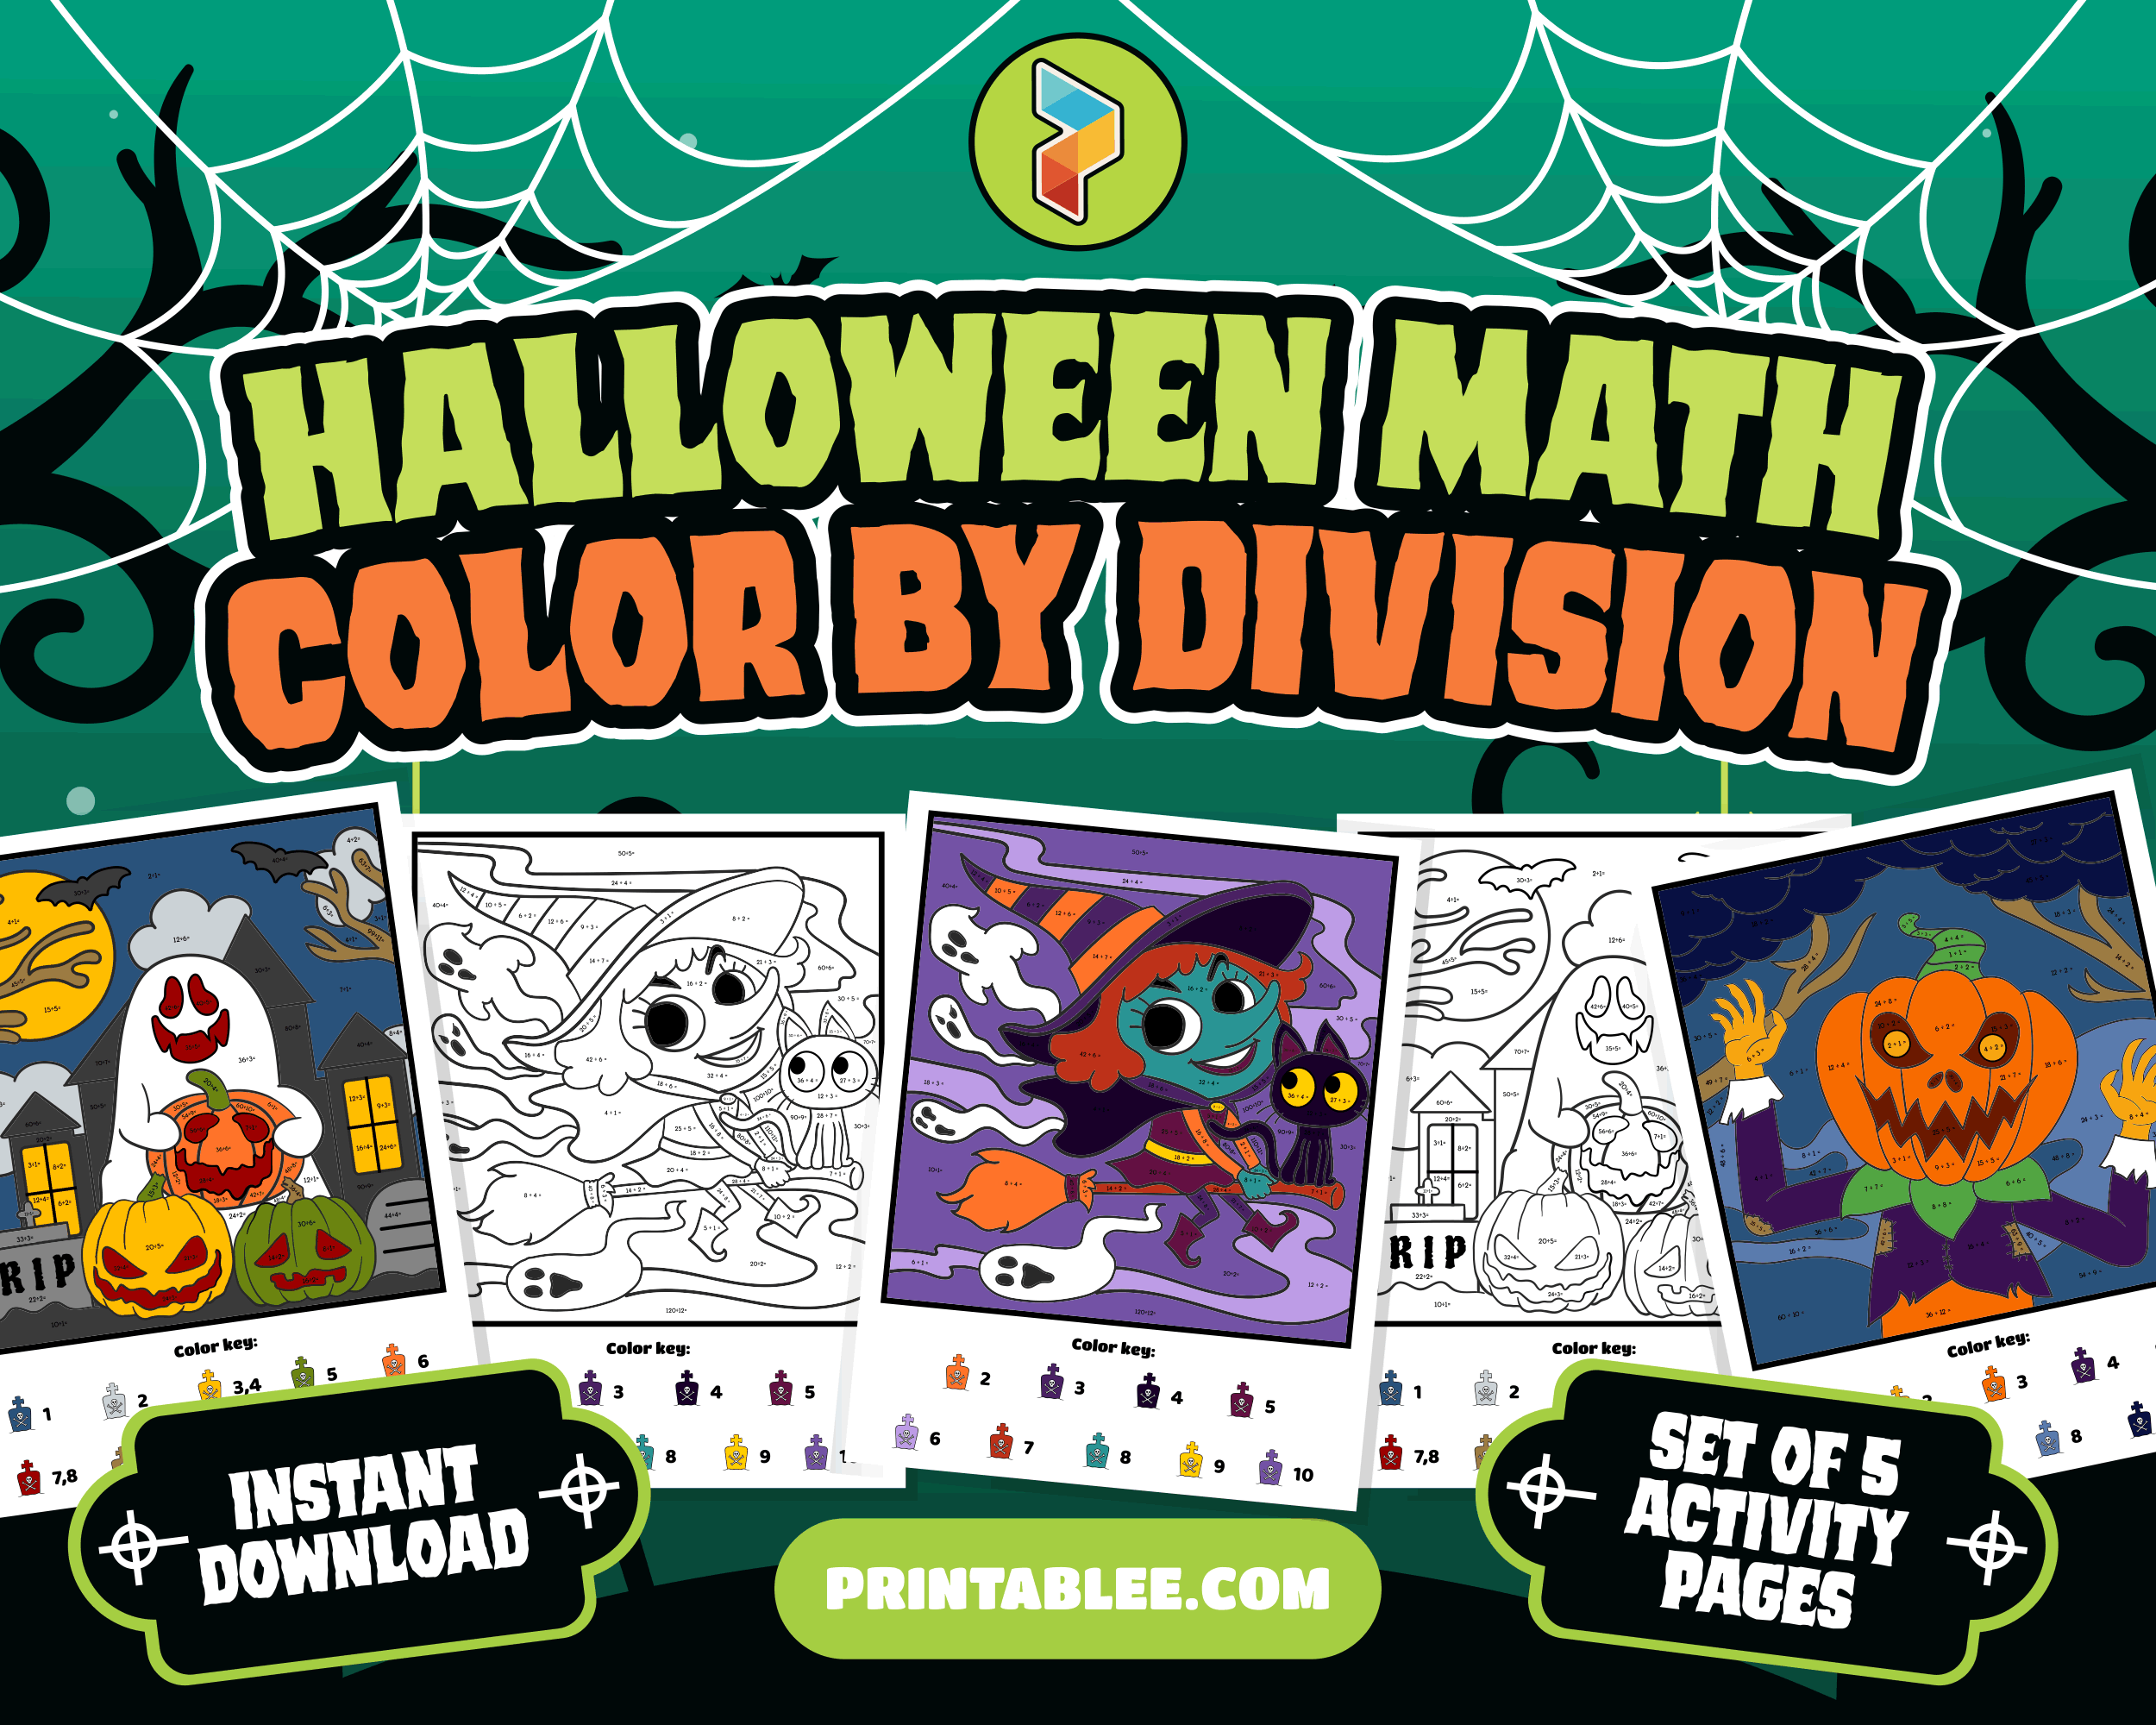 Fall+and+Halloween+Printable+Coloring+Activity+for+Kids+-+Holiday+Learning+Math+Division+|+Halloween+Math+Color+by+Division